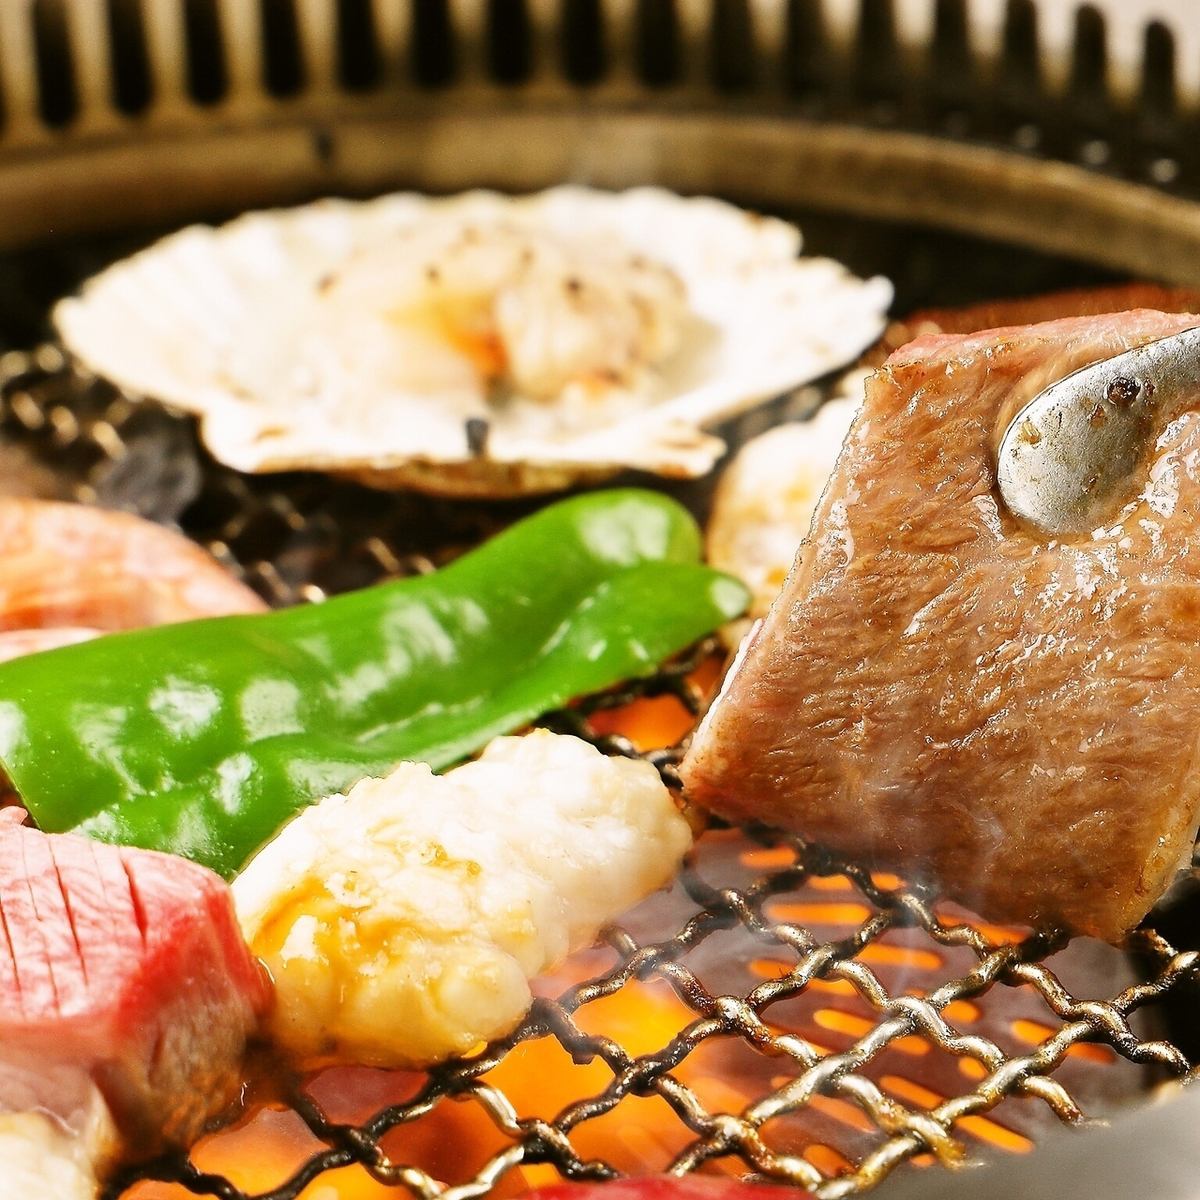 We also offer all-you-can-eat steaks of all kinds ☆ By grilling them in chunks, the flavor of the meat stands out!